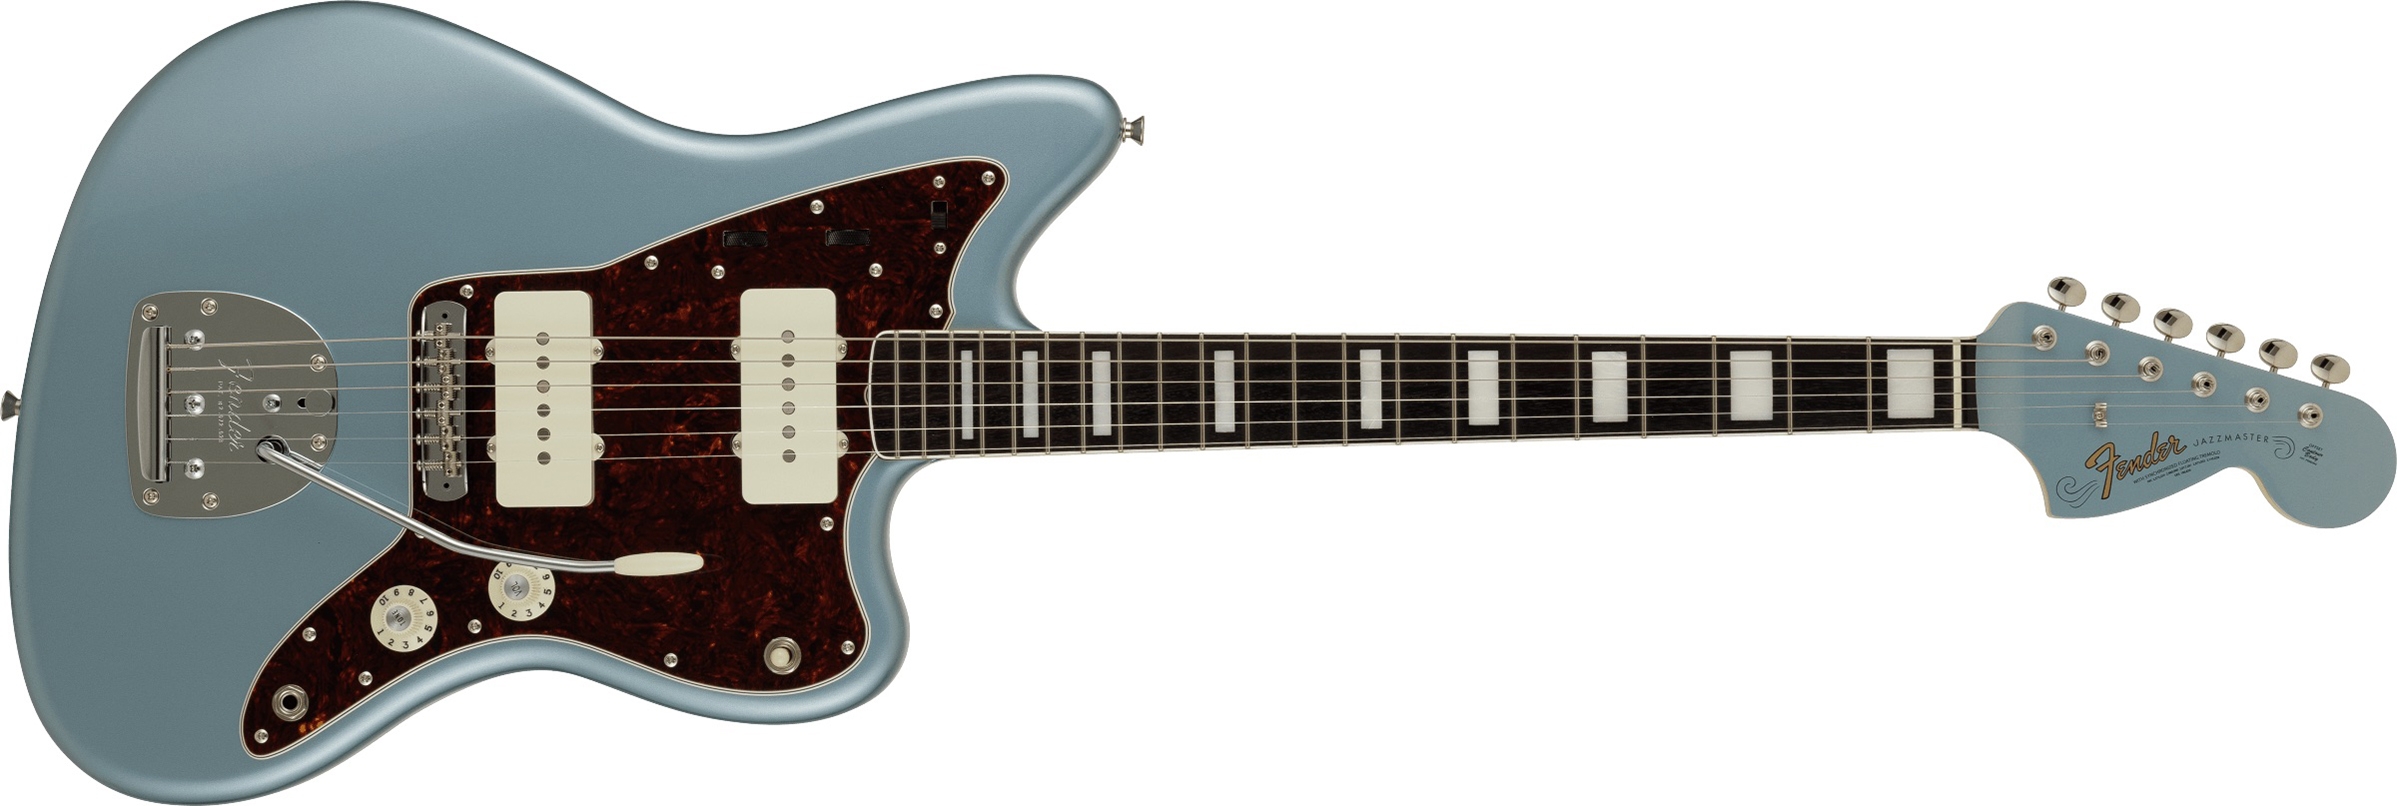 Fender Limited Edition MIJ Traditional Late ‘60s Jazzmaster Ice Blue  Metallic, Matching Headstock